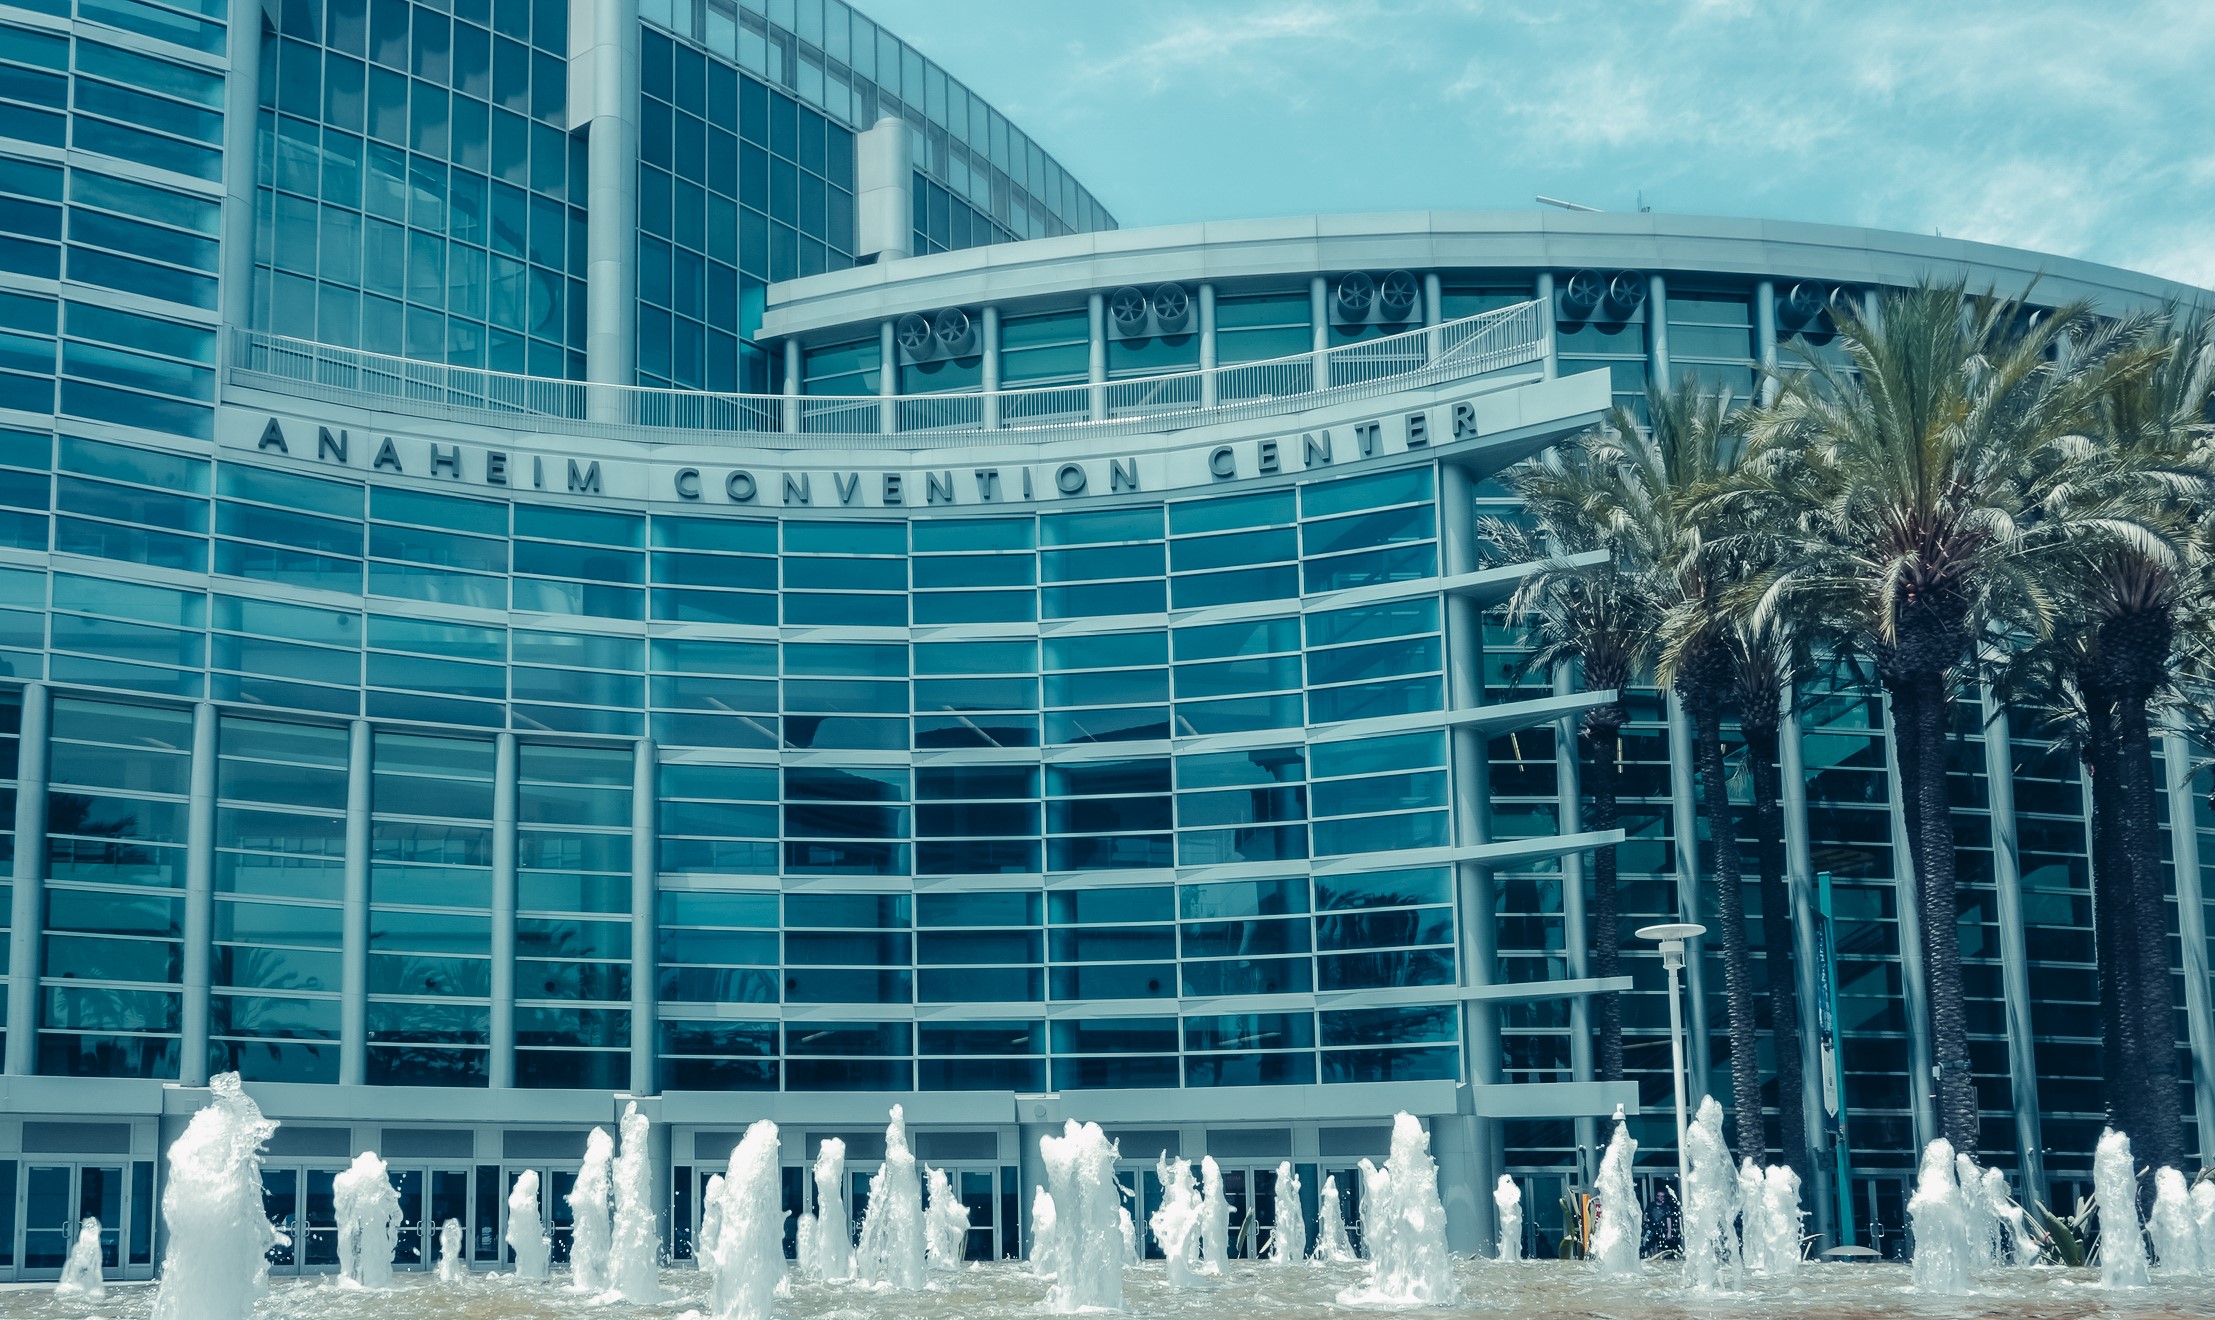 View of the Anaheim Convention Center on a sunny day, with palm trees and blue sky seen from across the main plaza and fountain.